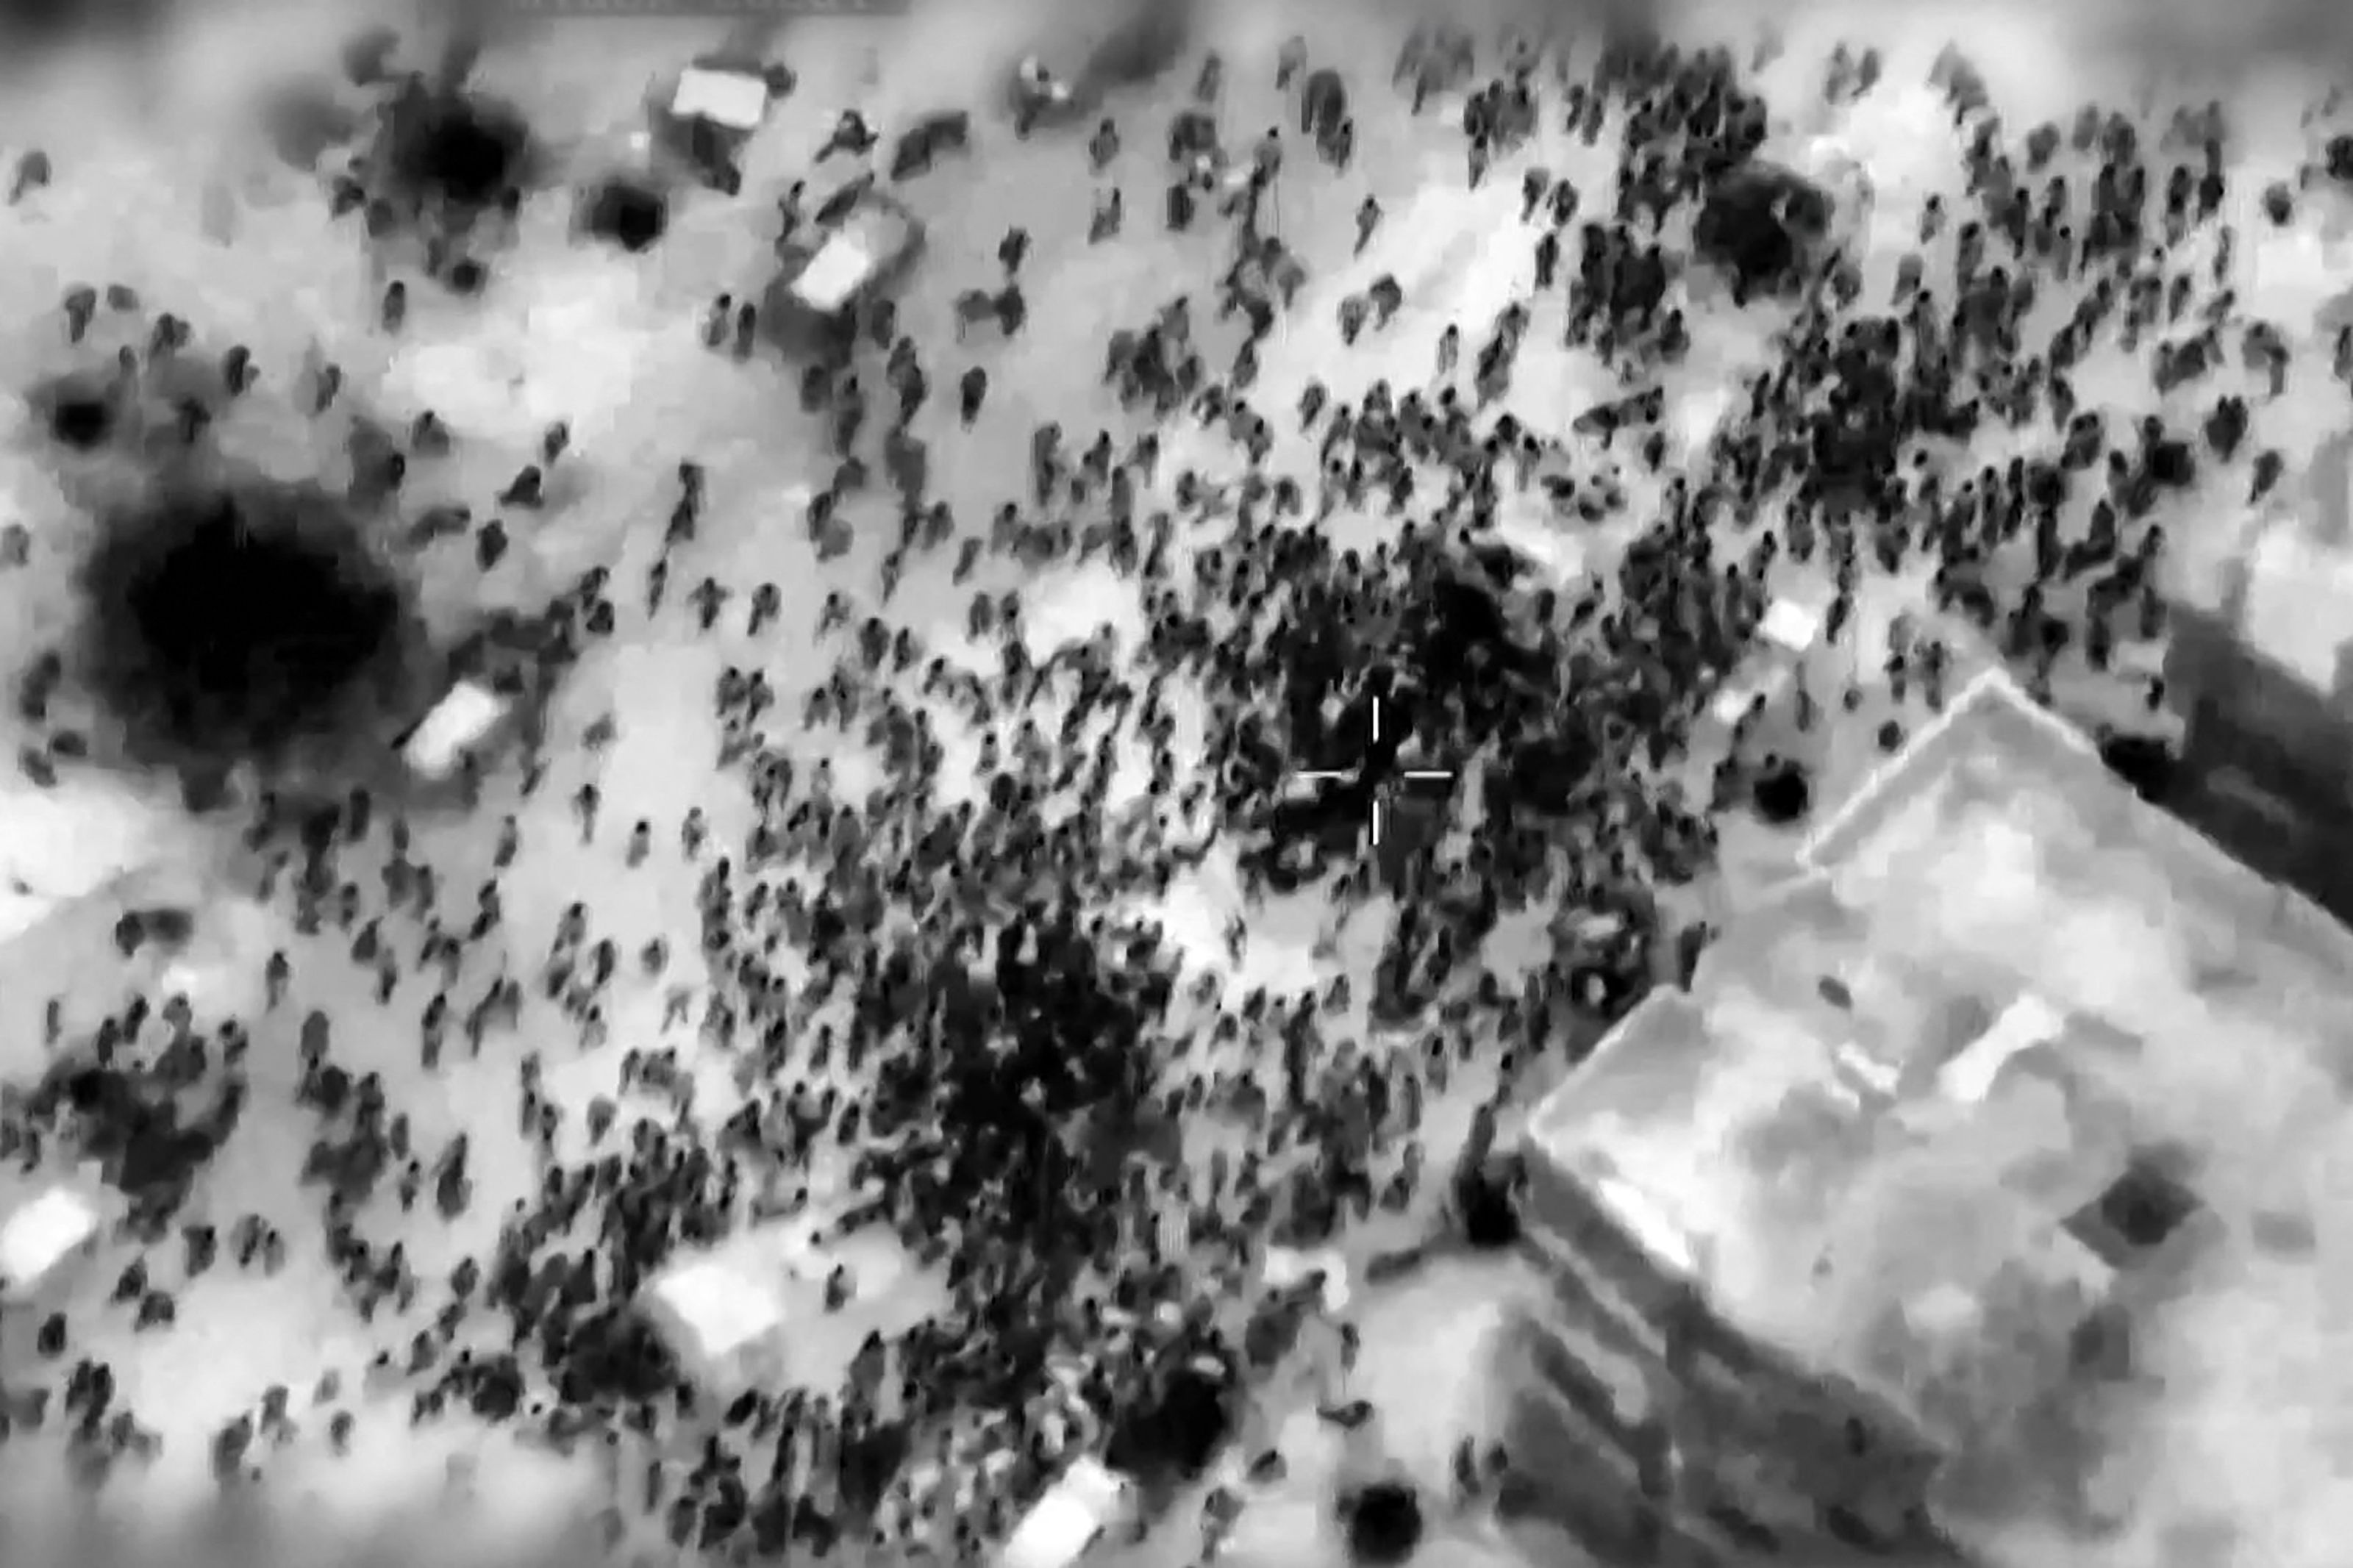 Image grab from a handout video released by the Israeli army of crowds gathering to receive food aid in Gaza © ALINE MANOUKIAN / ISRAELI ARMY / AFP